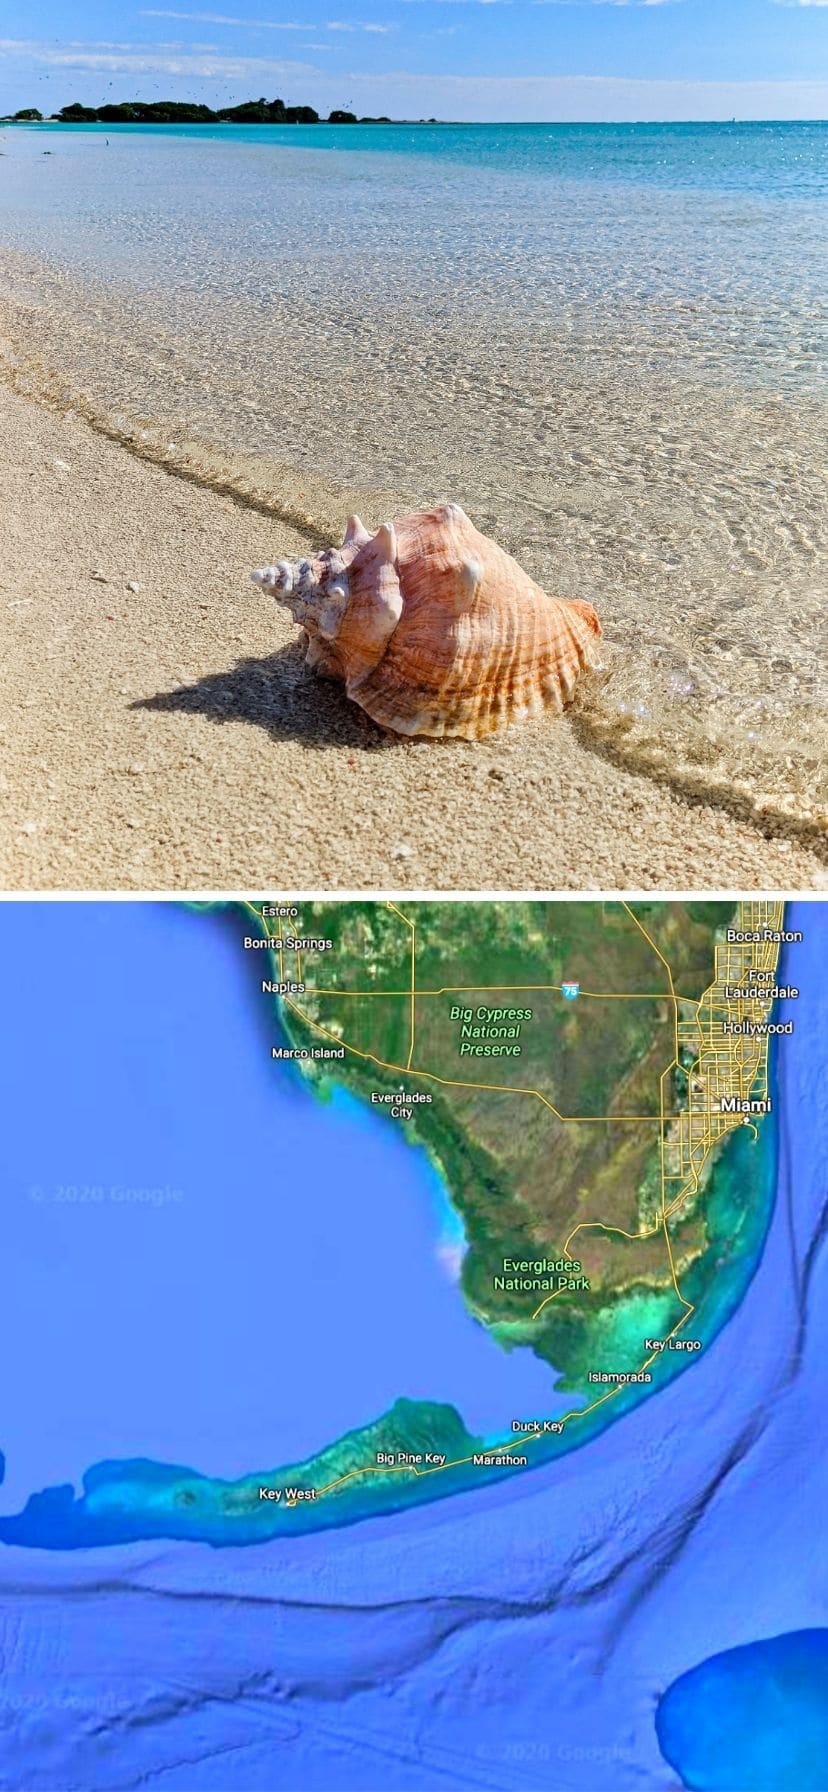 Conch shell on beach with map of Florida Keys Kayaking